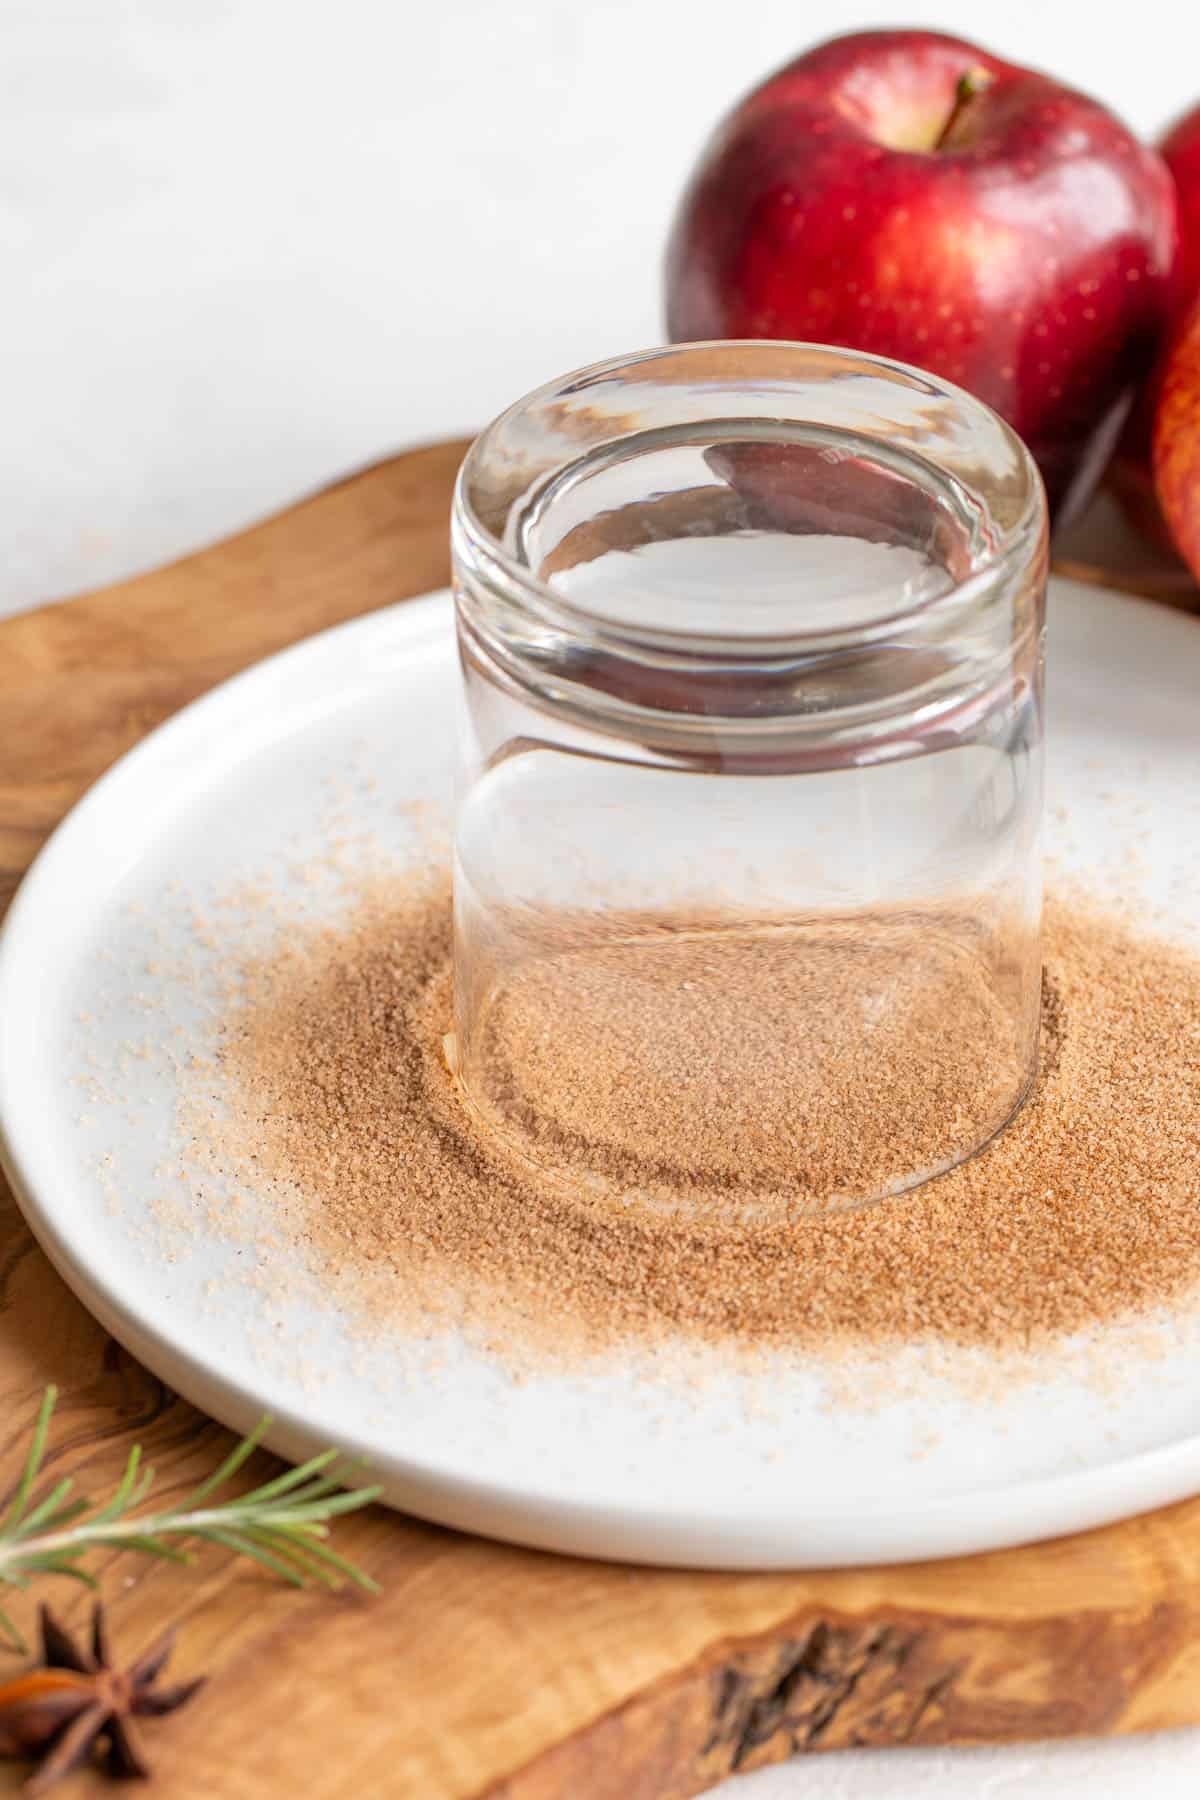 A glass is dipped into a mixture of ground cinnamon and sugar on a plate to make an apple cider margarita.